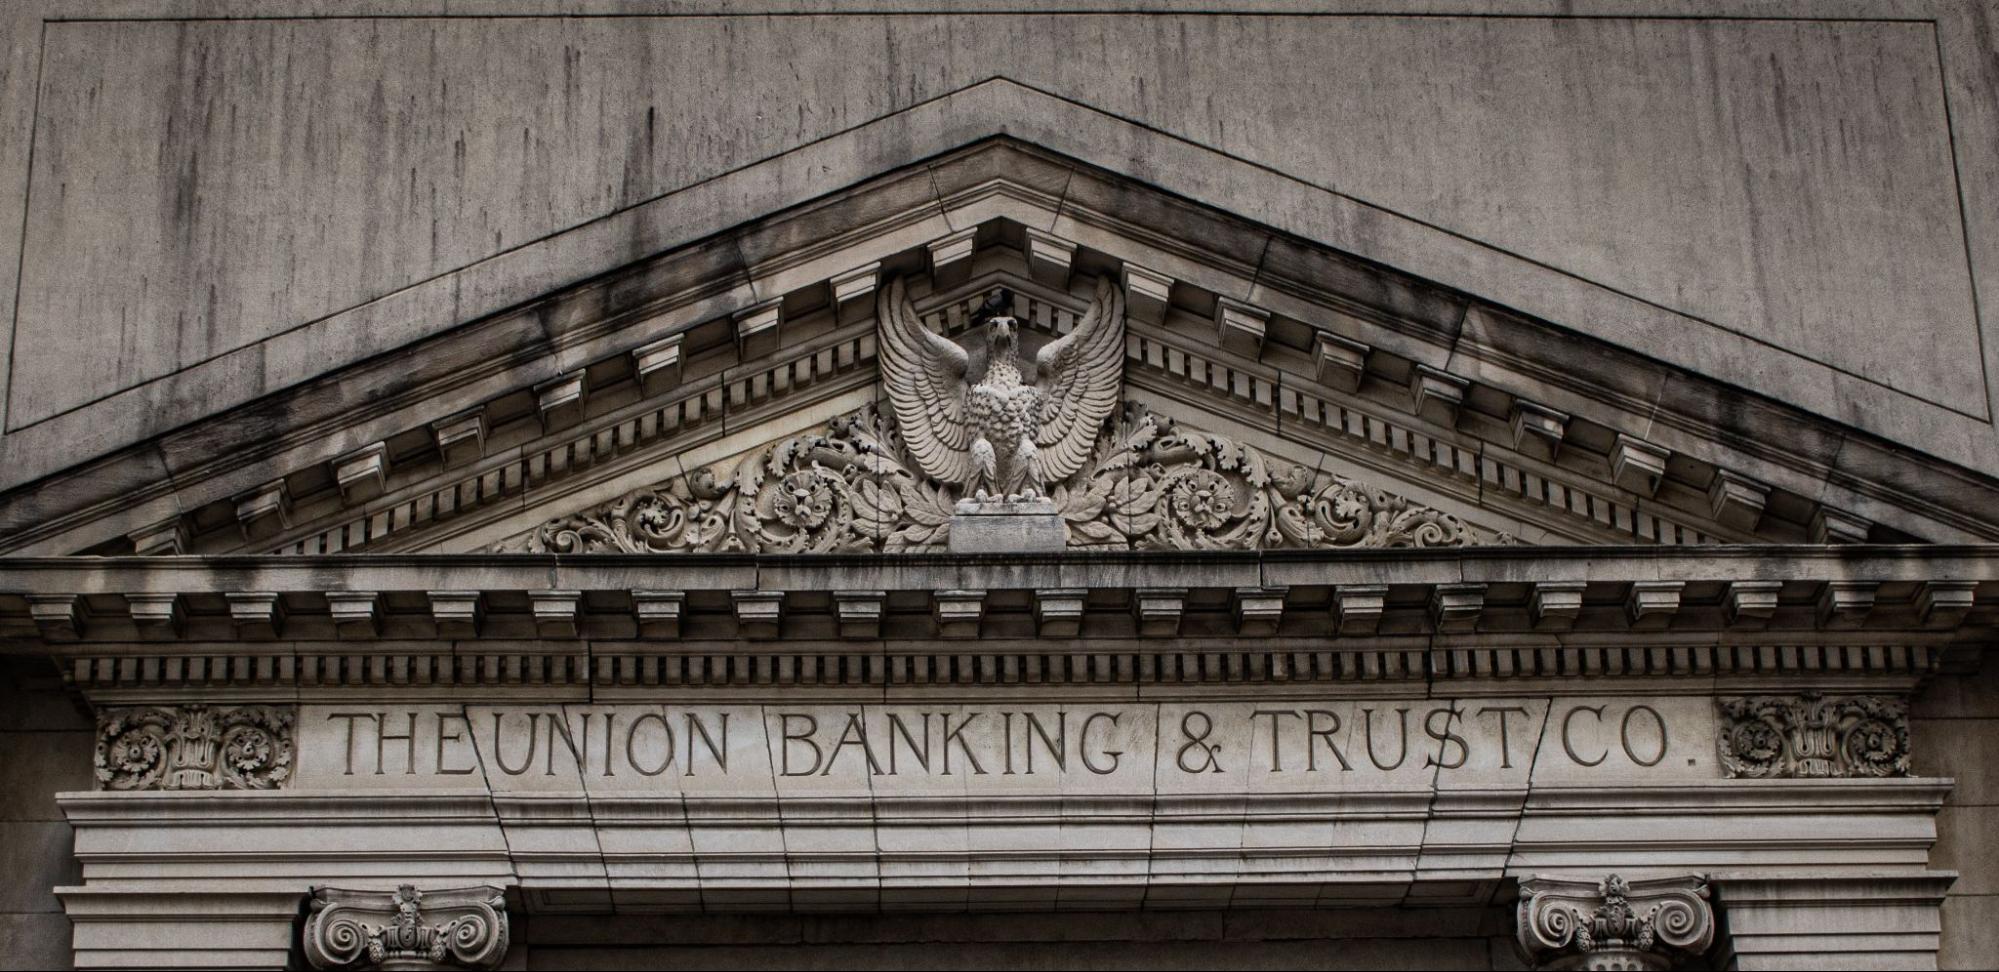 The Union Banking 